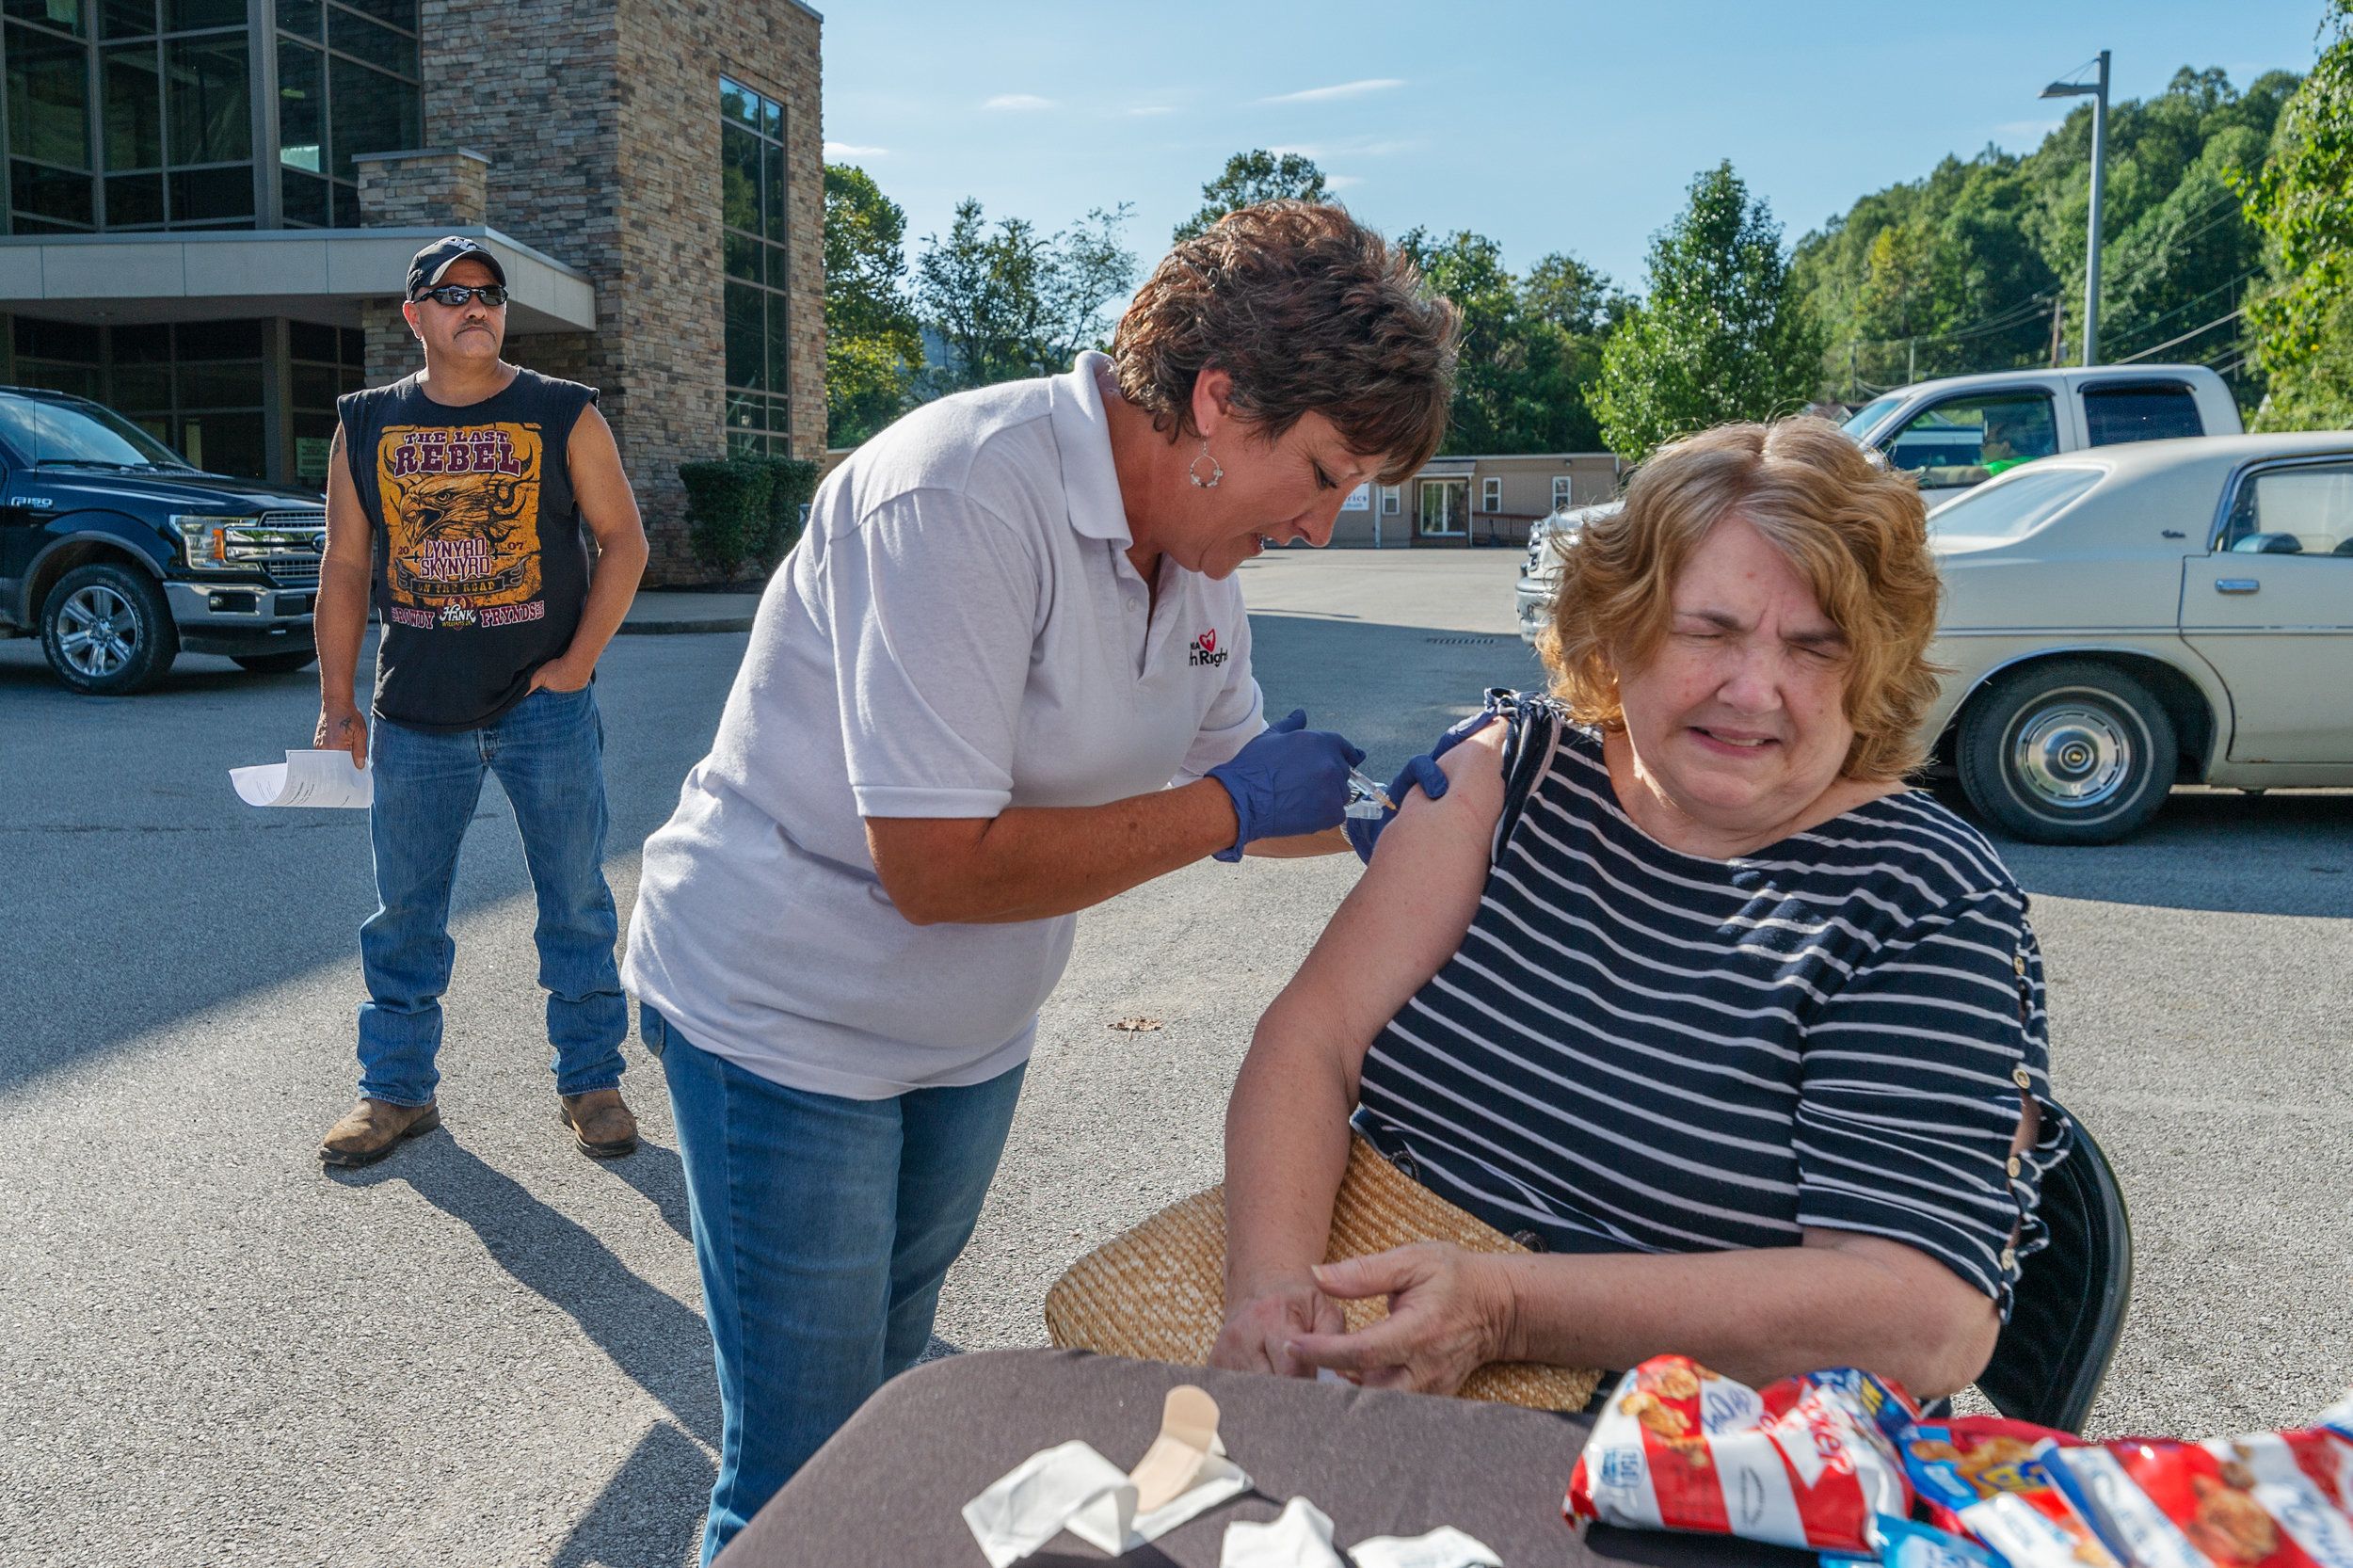 West Virginia Health Right sponsors mobile clinics that deliver hepatitis A vaccinations and HIV testing to rural areas acros